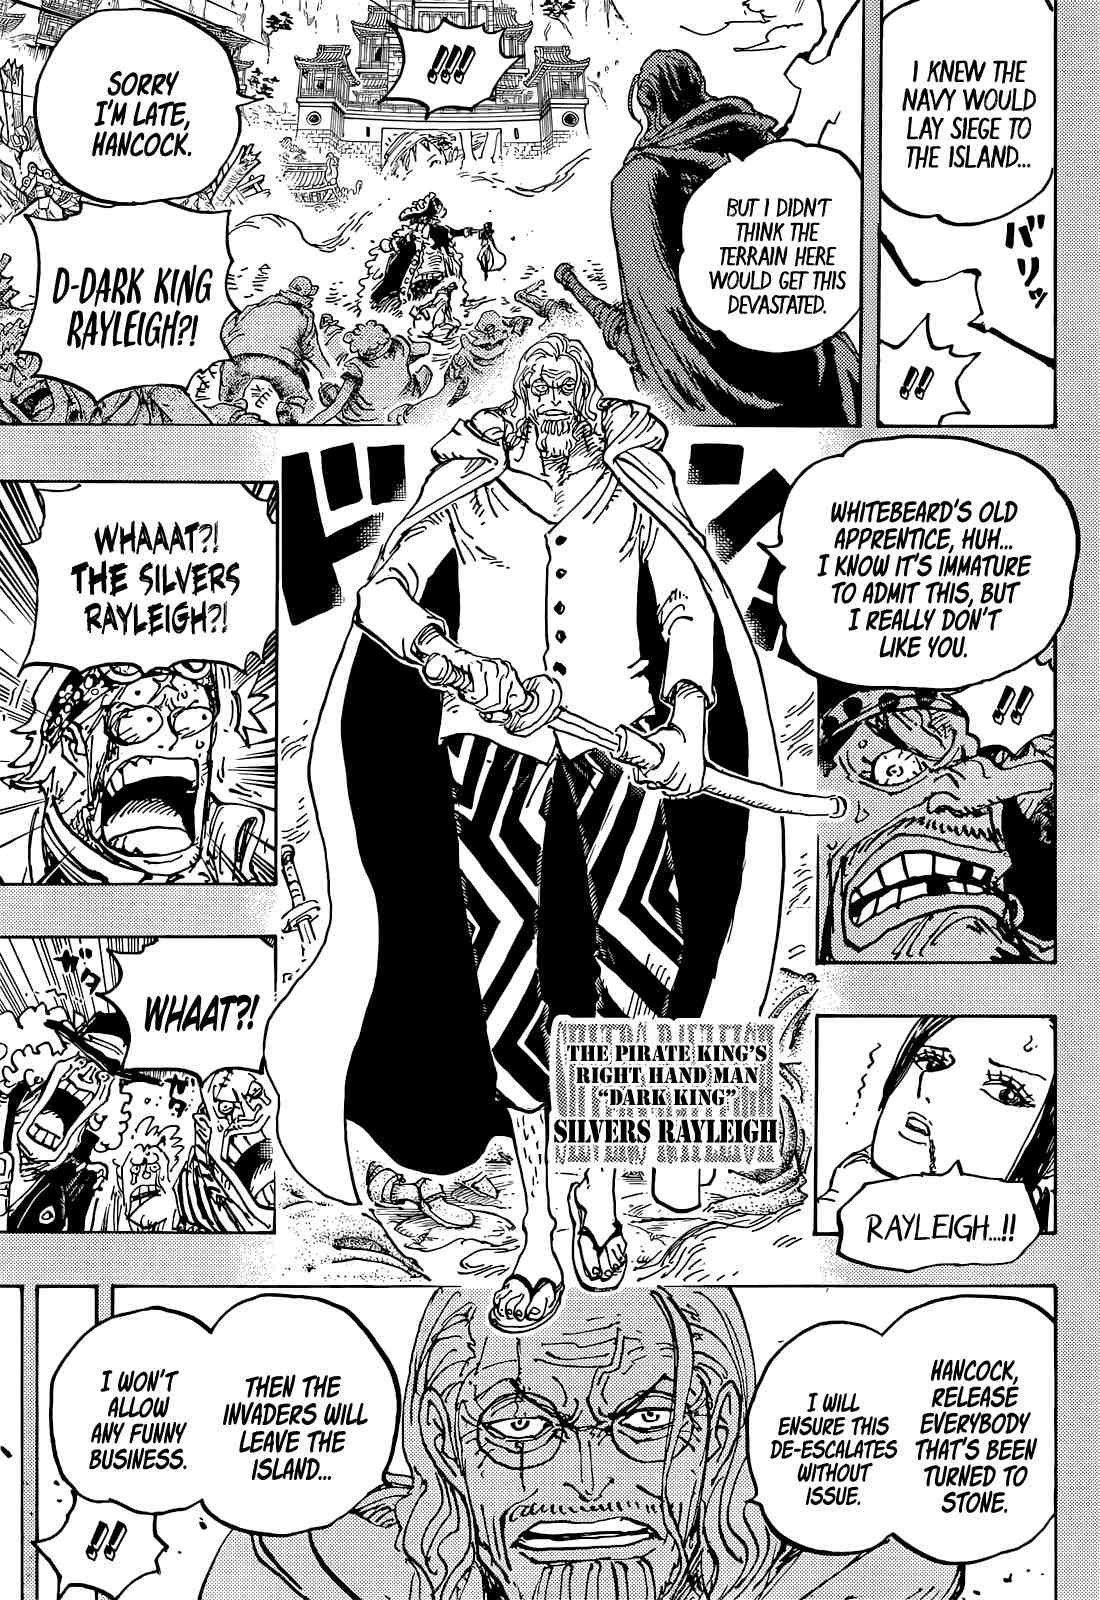 One Piece chapter 1059: date, time and where to read online in English -  Meristation